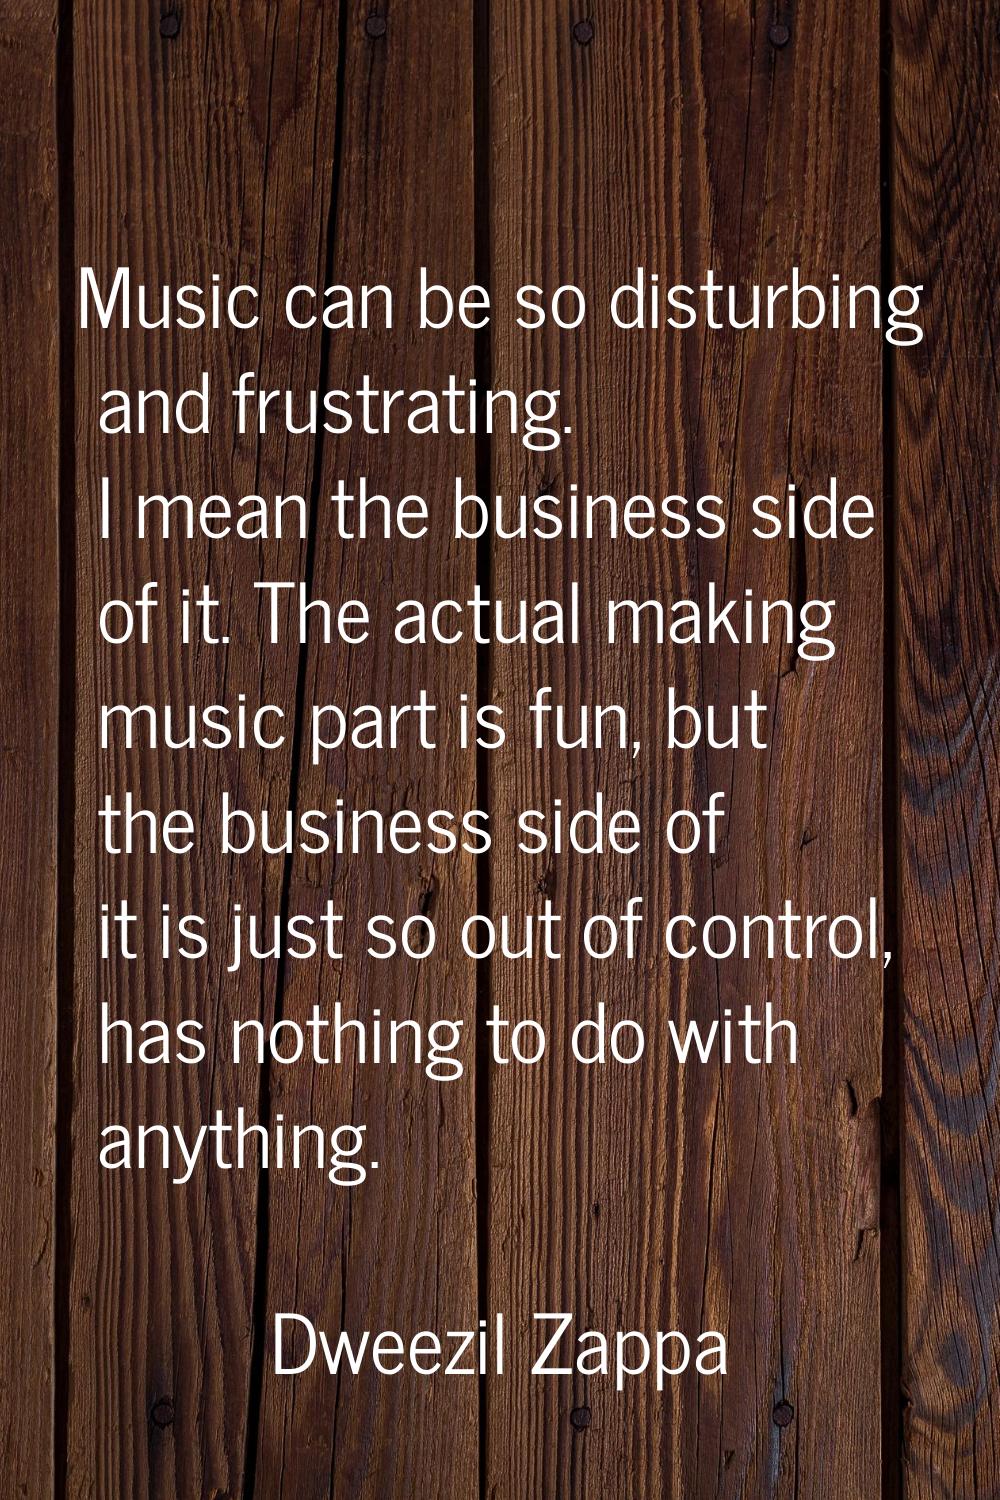 Music can be so disturbing and frustrating. I mean the business side of it. The actual making music